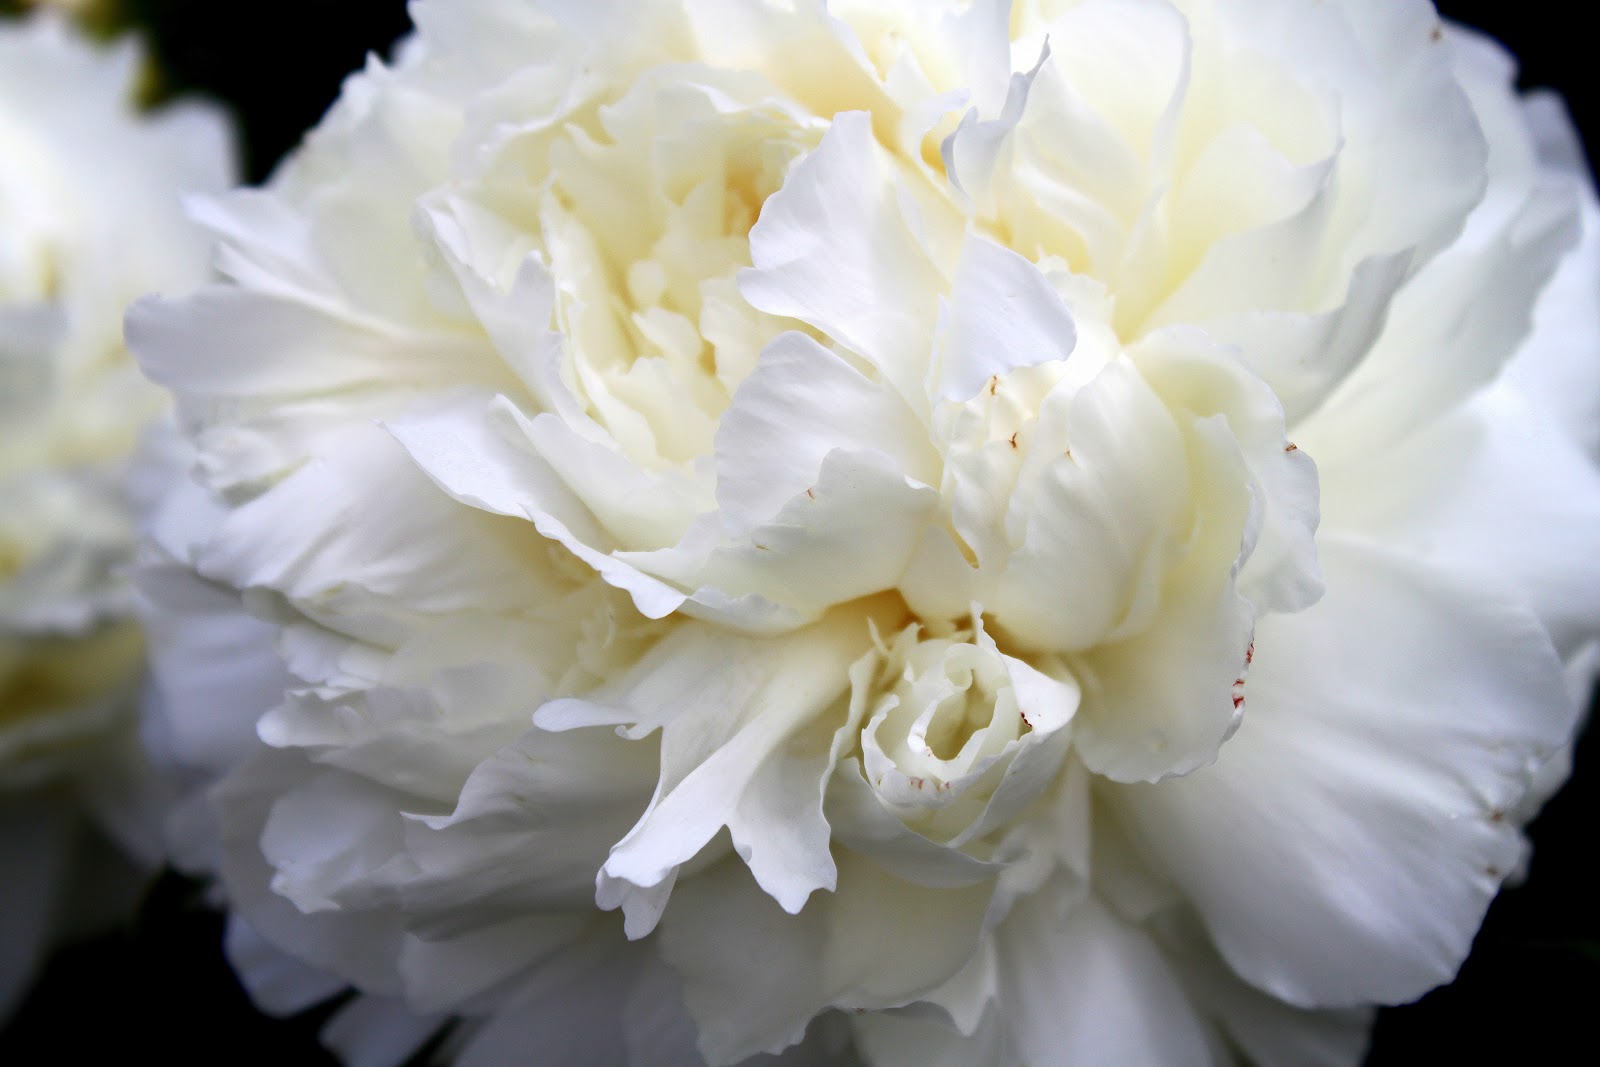 Widow's Endorphins: The Divine Peonies of Thomas Darnell